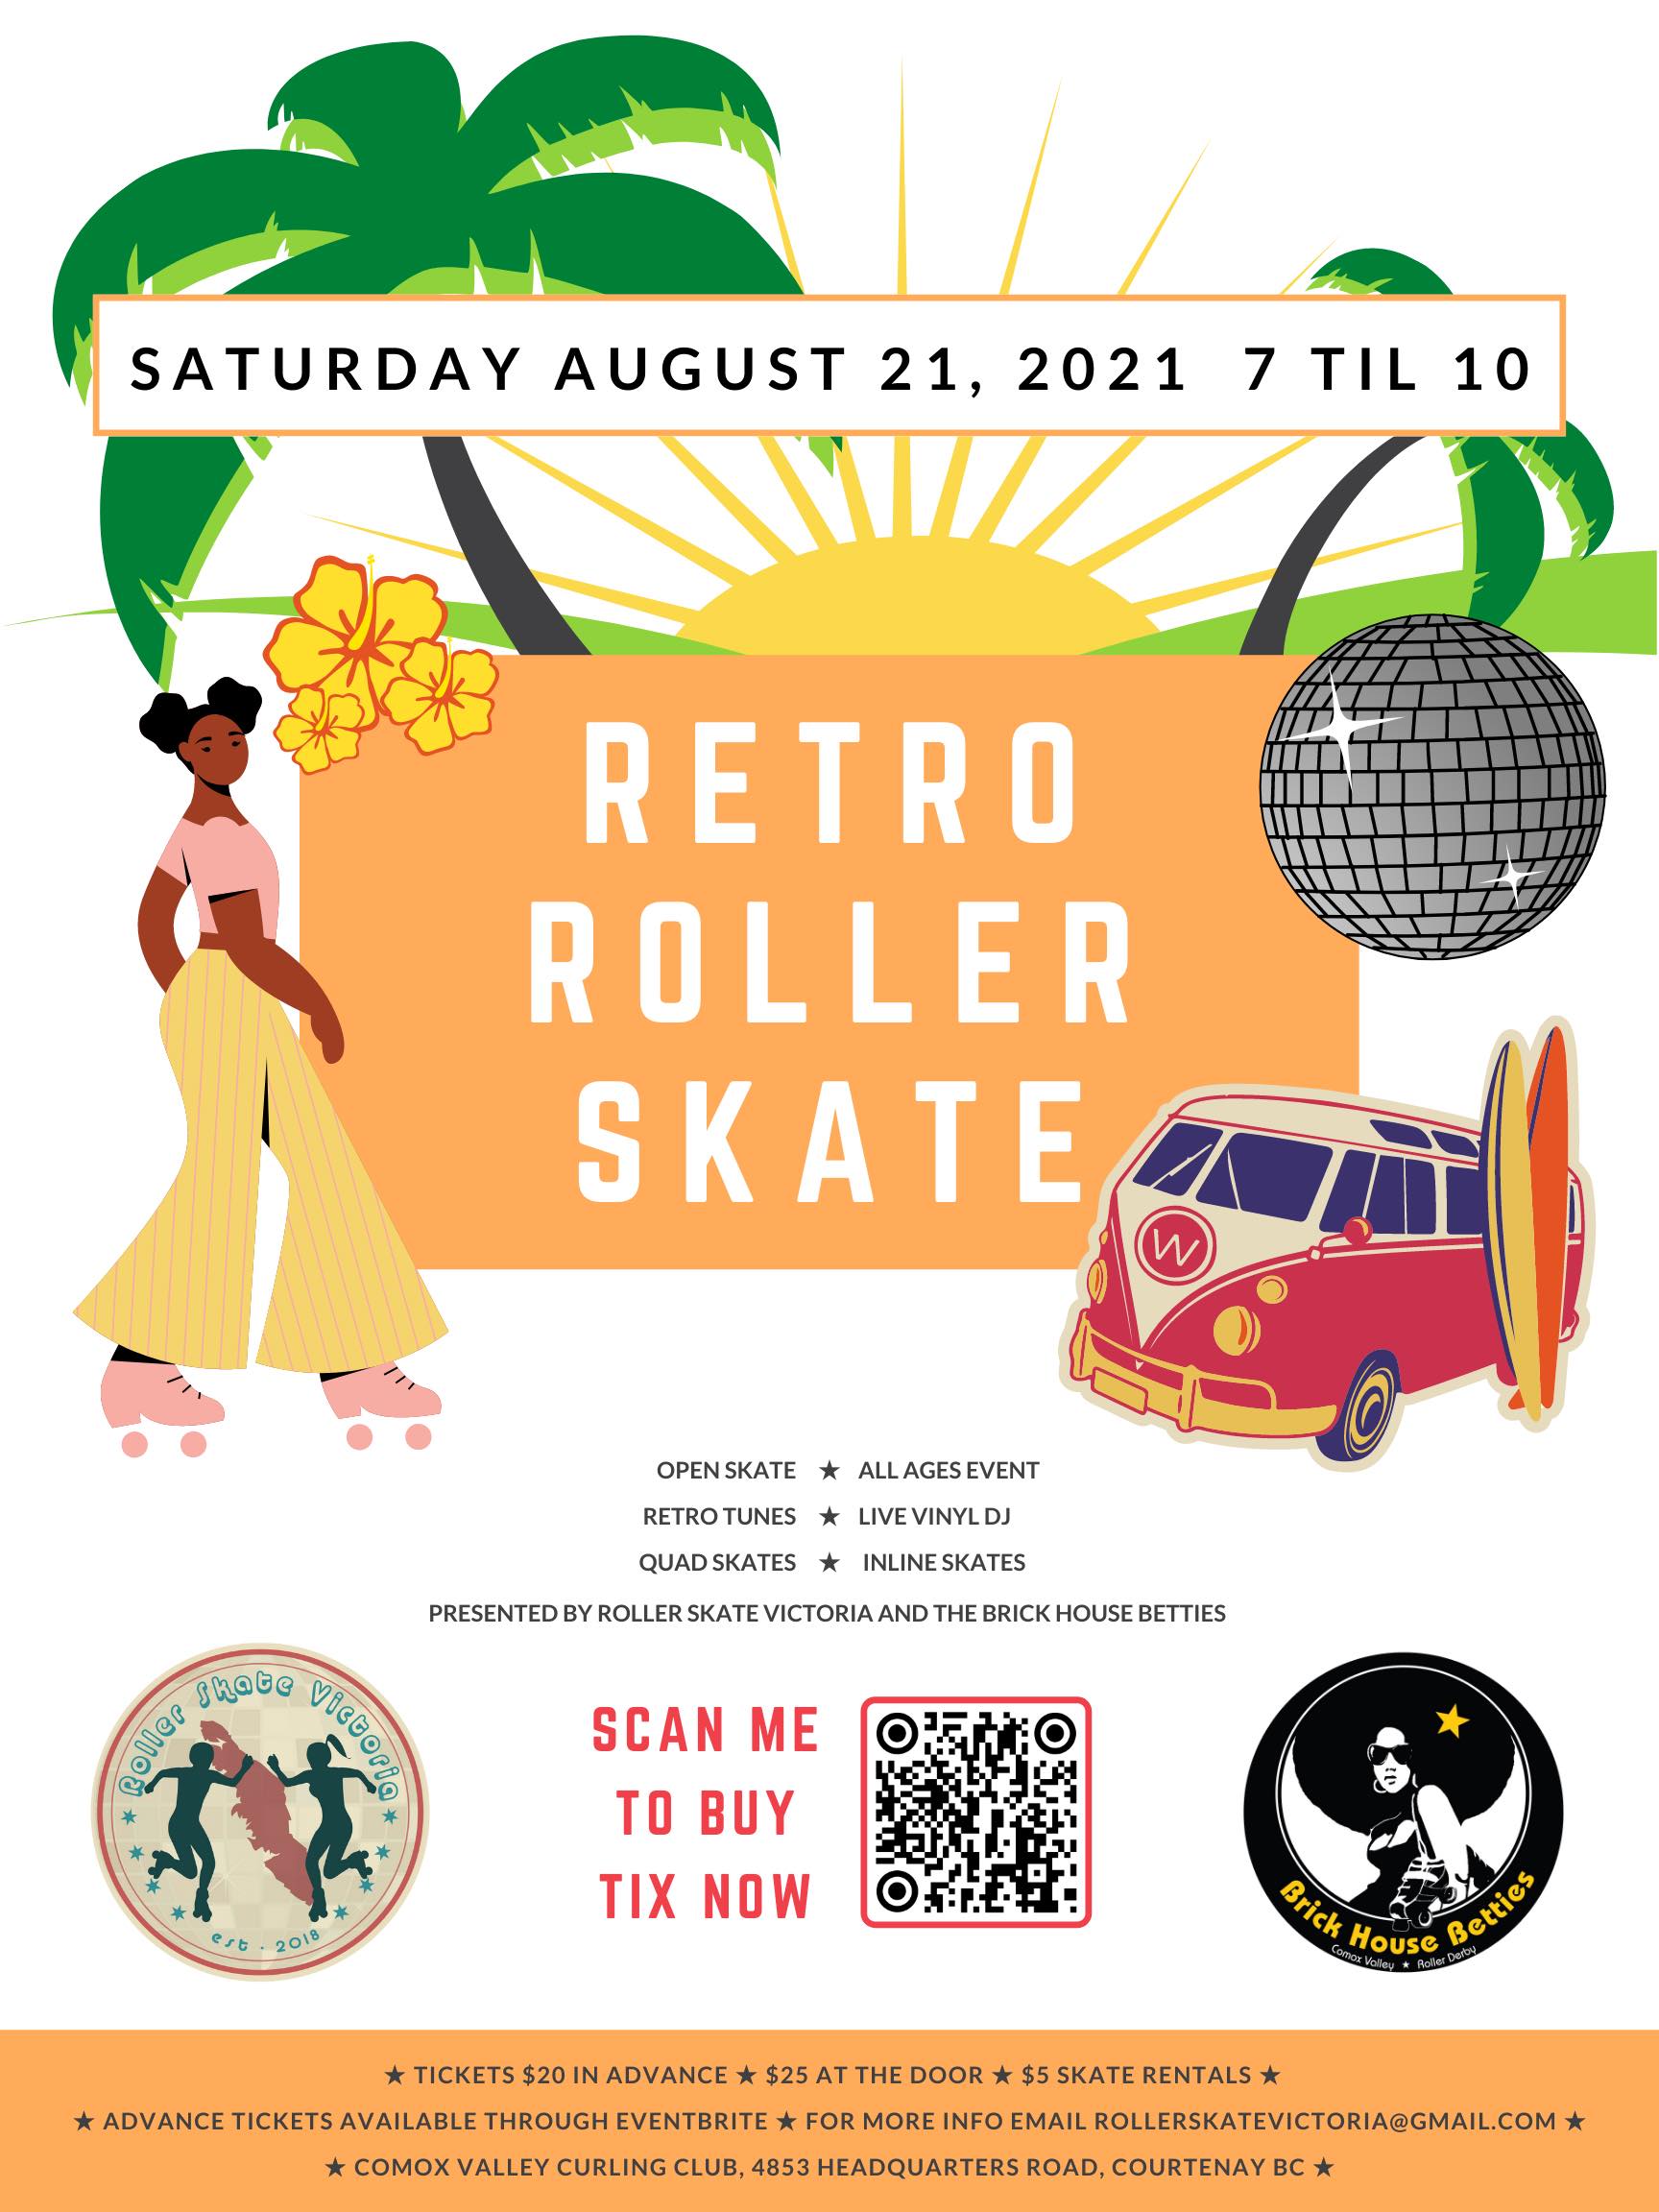 Intro to Roller Skating sessions are back!